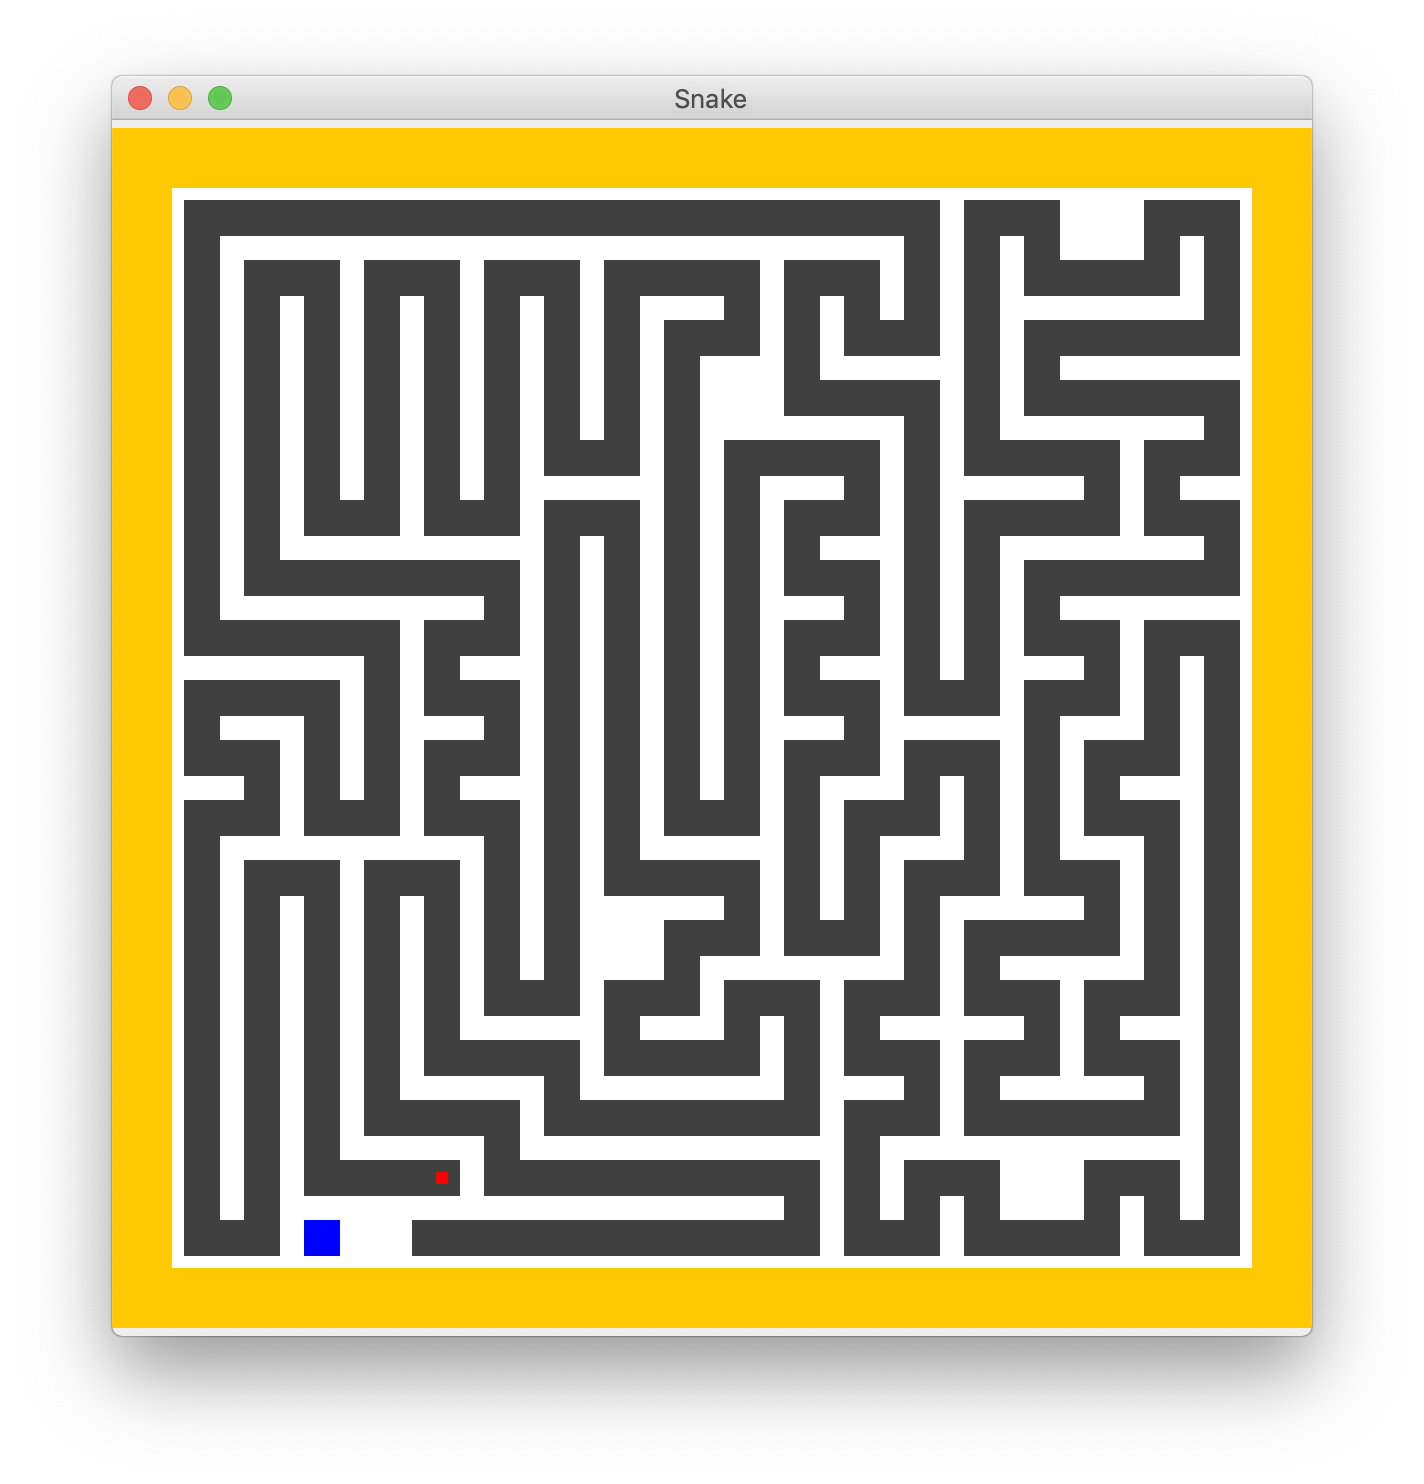 GitHub - amitaysoffer/snake-game: A new version of the classic Snake game  with cool new features, sounds and LS setup.